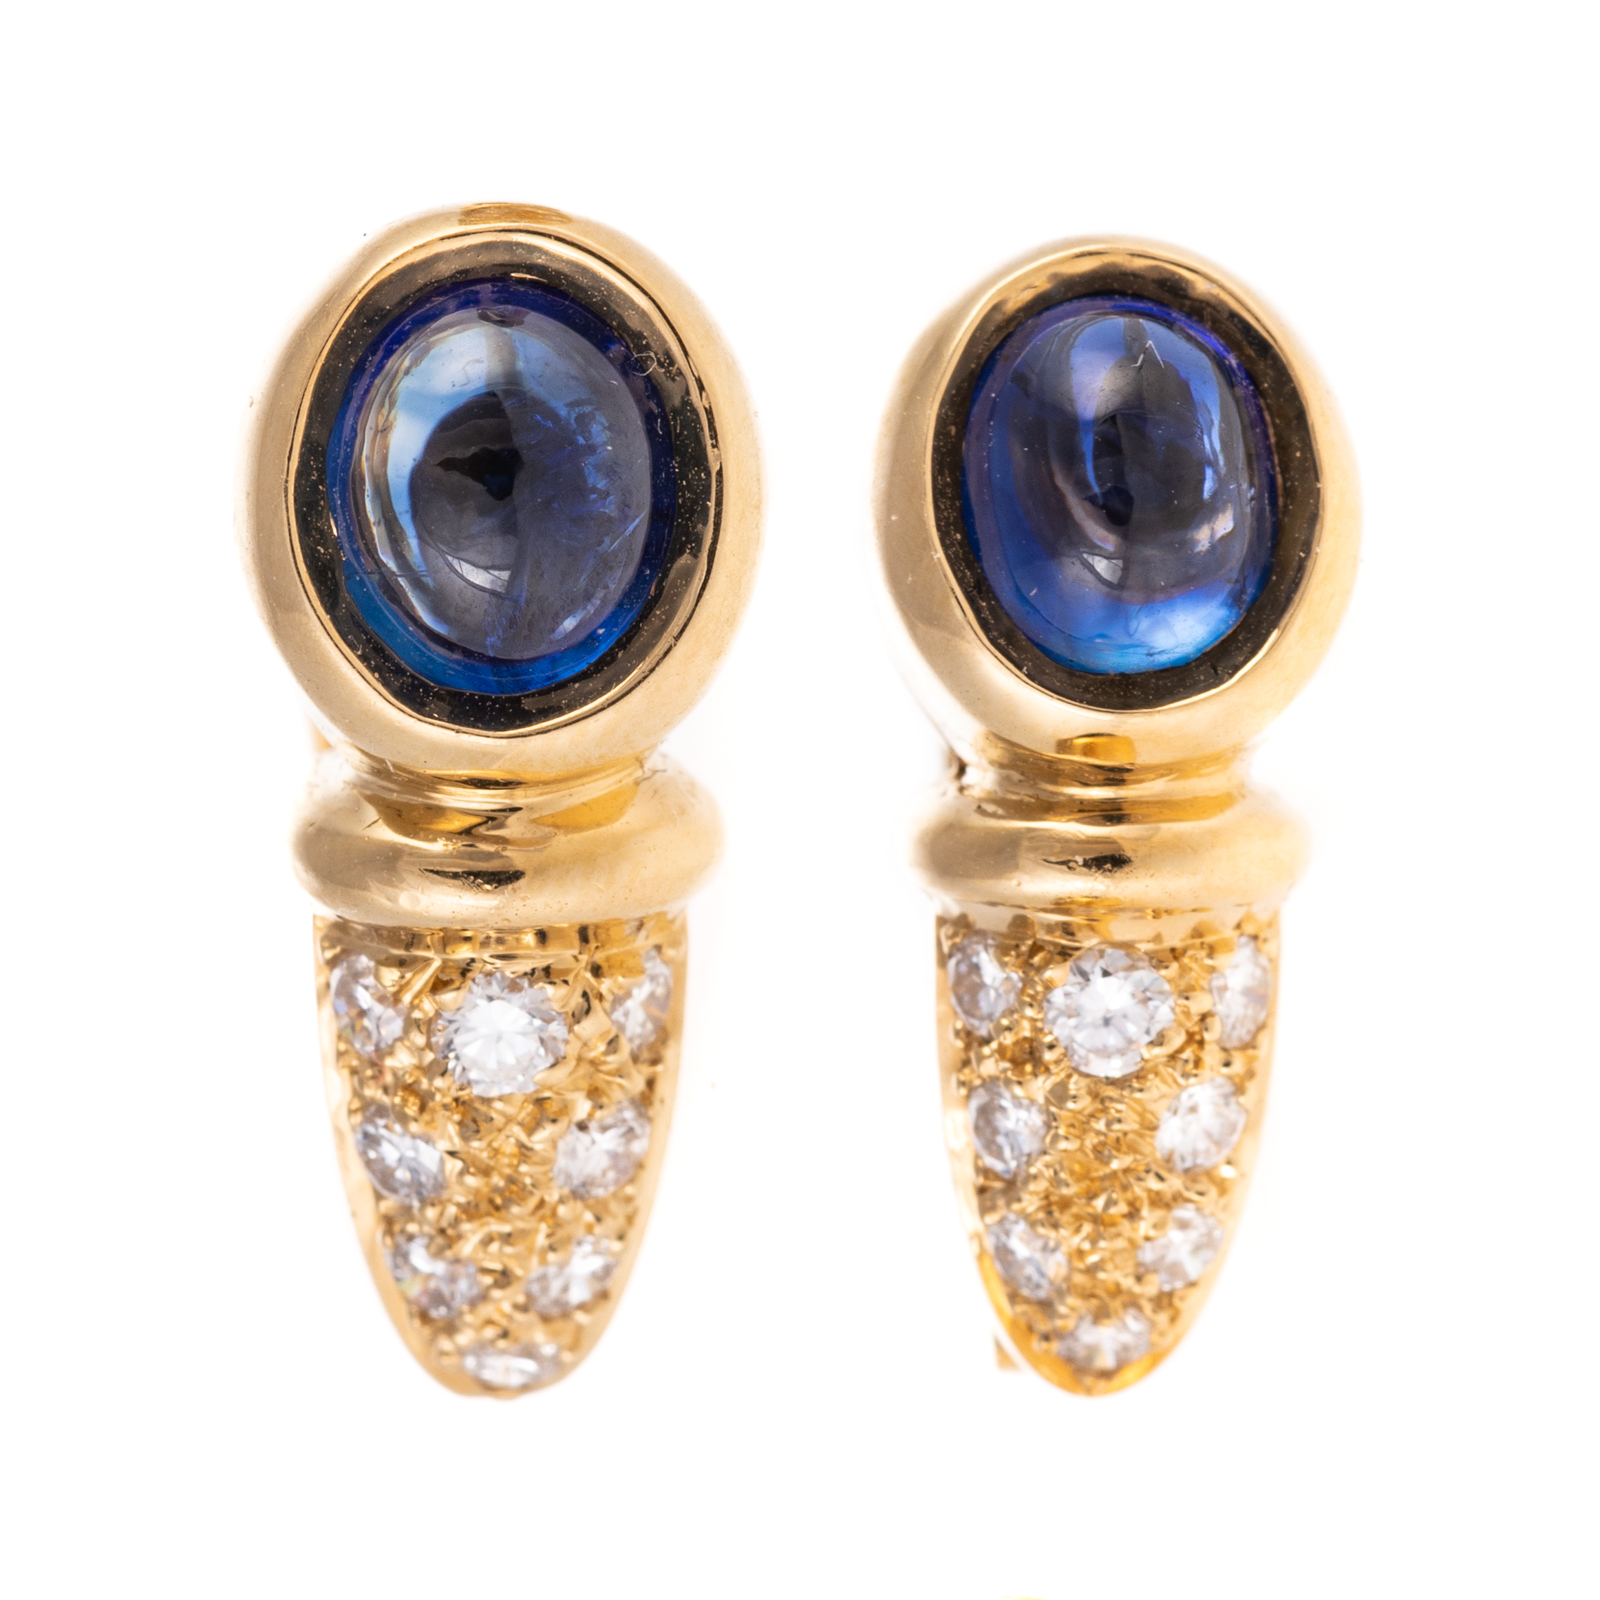 A PAIR OF CABOCHON SAPPHIRE HALF